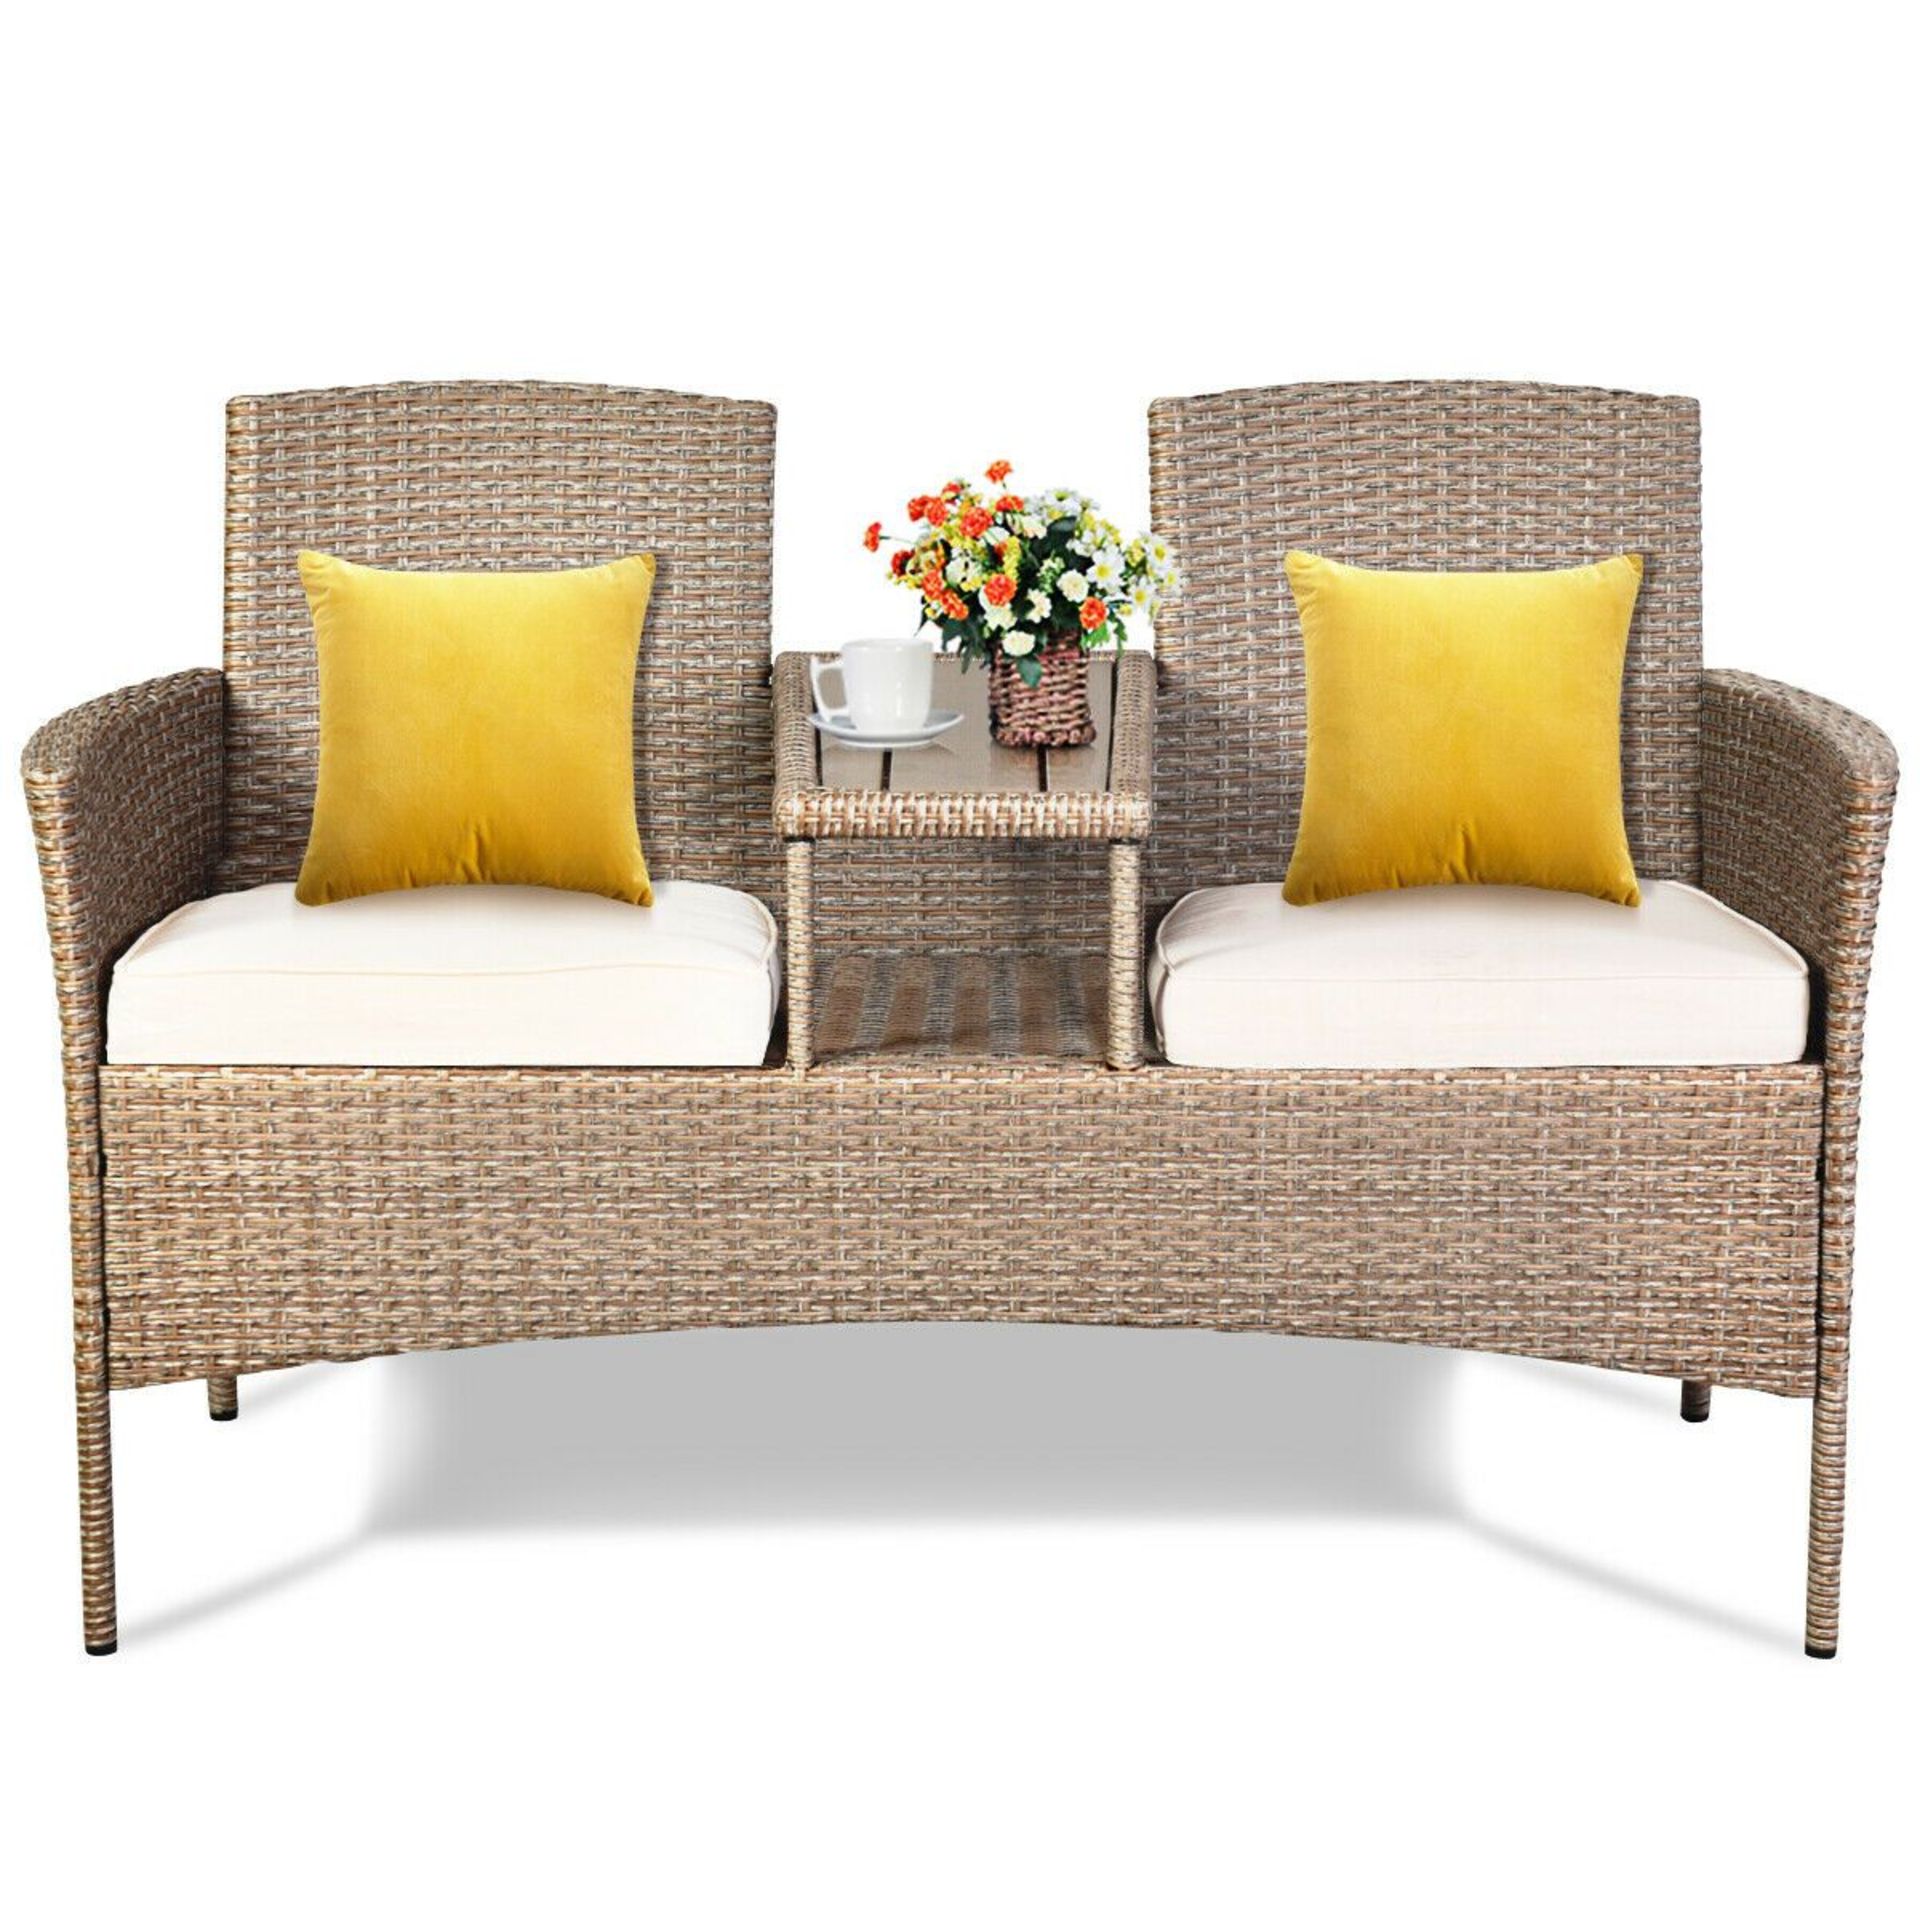 Outdoor 2 Seater Rattan Chair Middle Tea Table Padded Cushions. RRP £199.99. If you are looking - Image 2 of 2